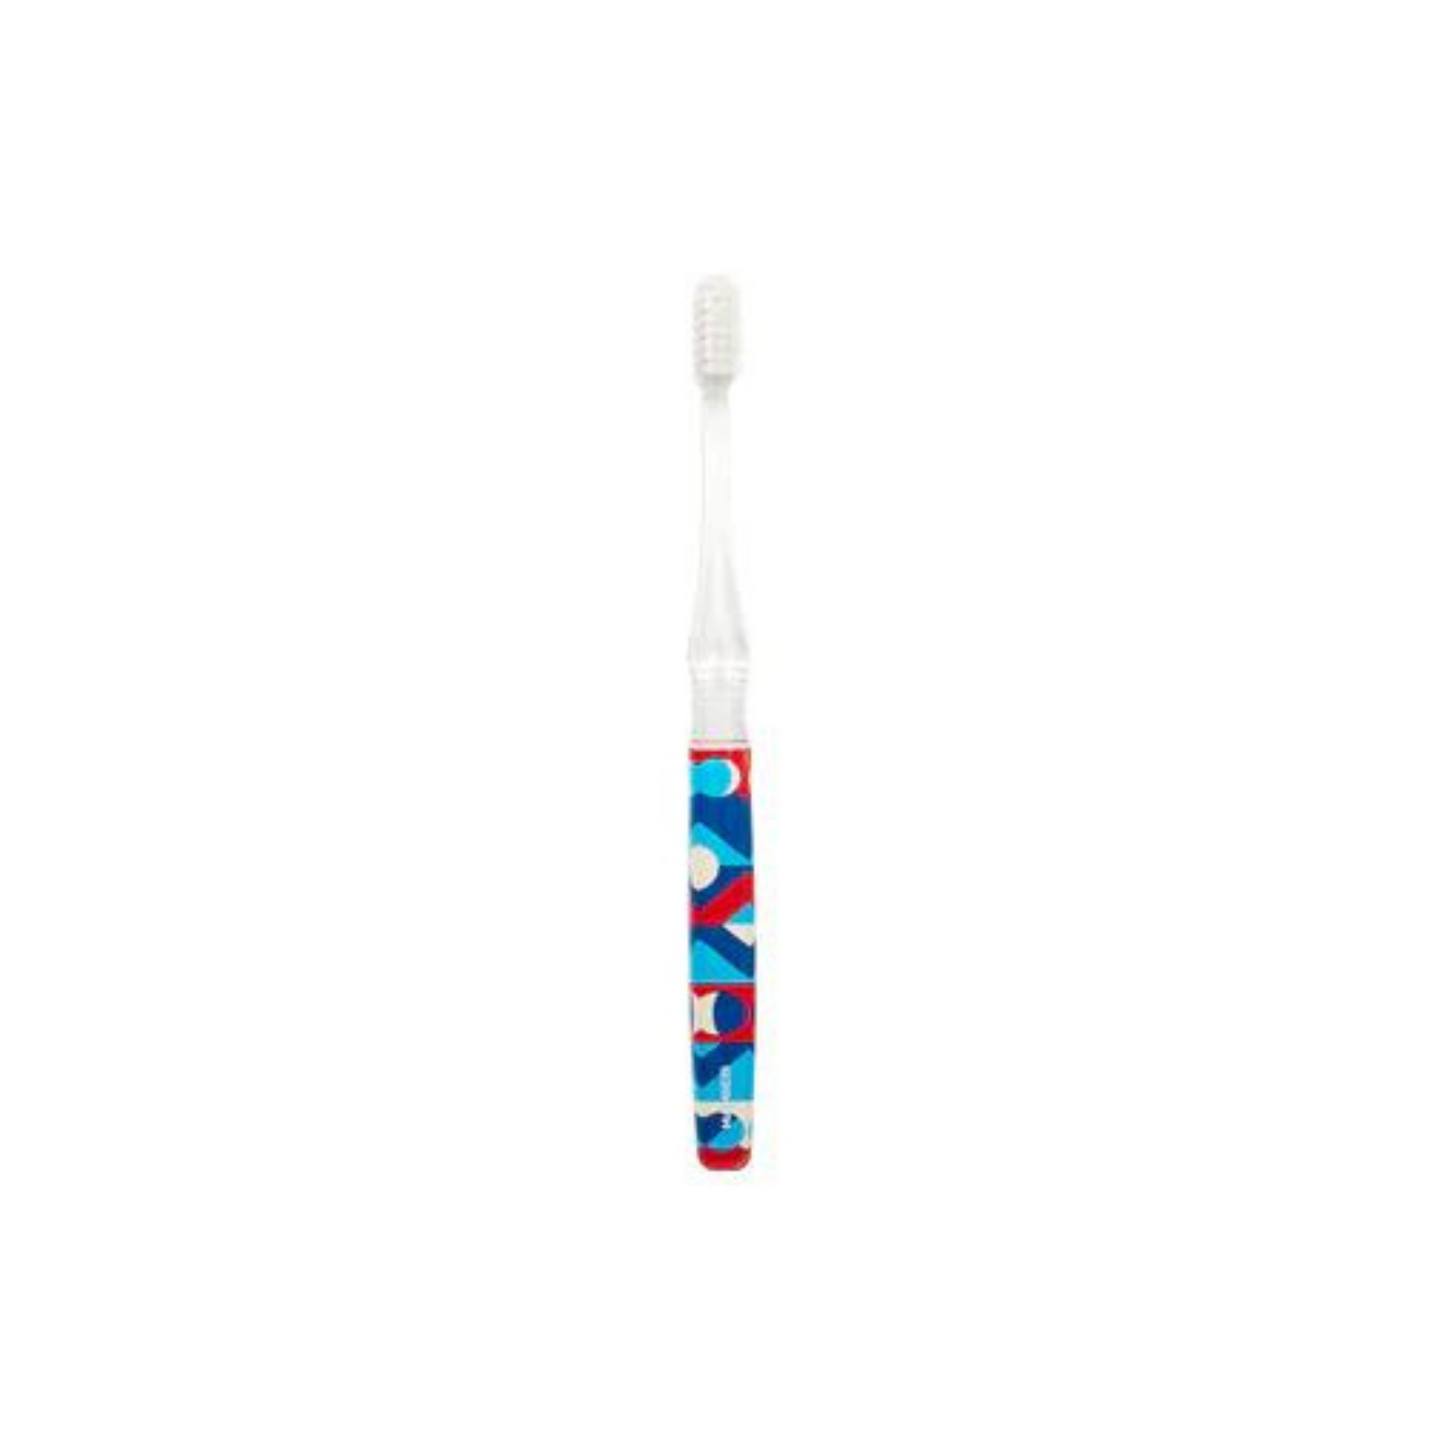 Primary Image of Toothbrush - Lunar